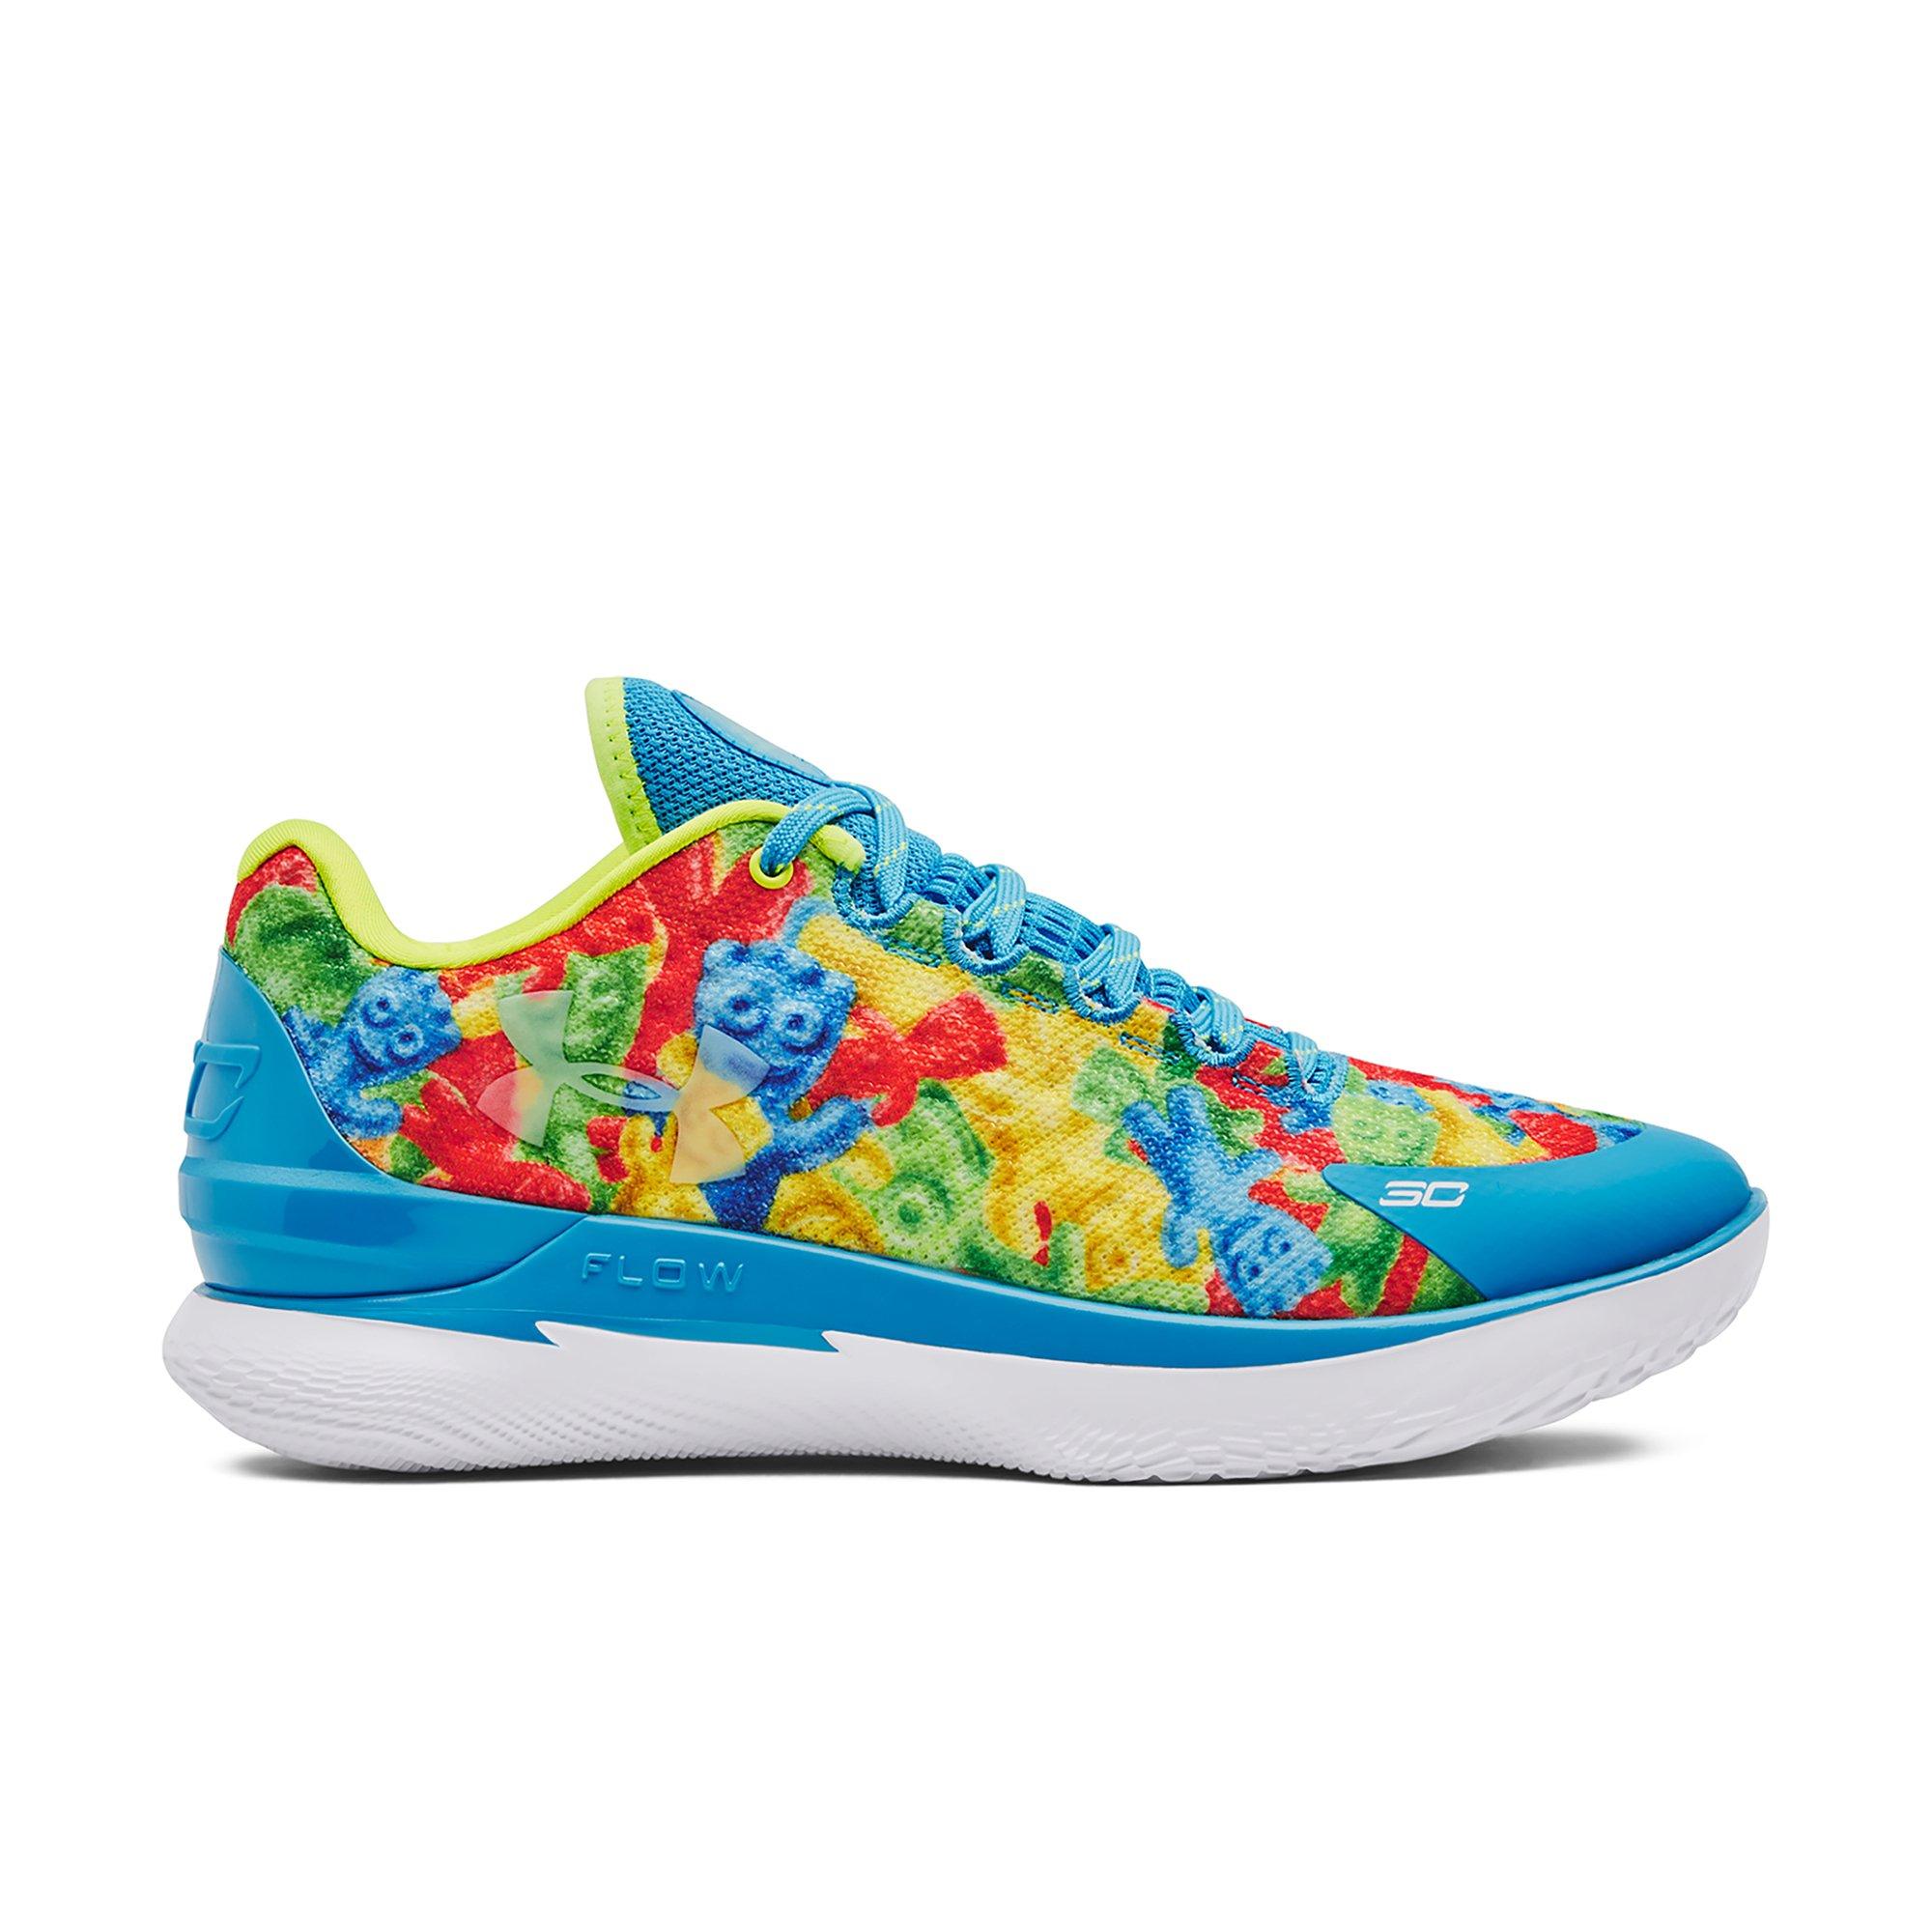 Sour Patch Kids Steph Curry Shoes | lupon.gov.ph